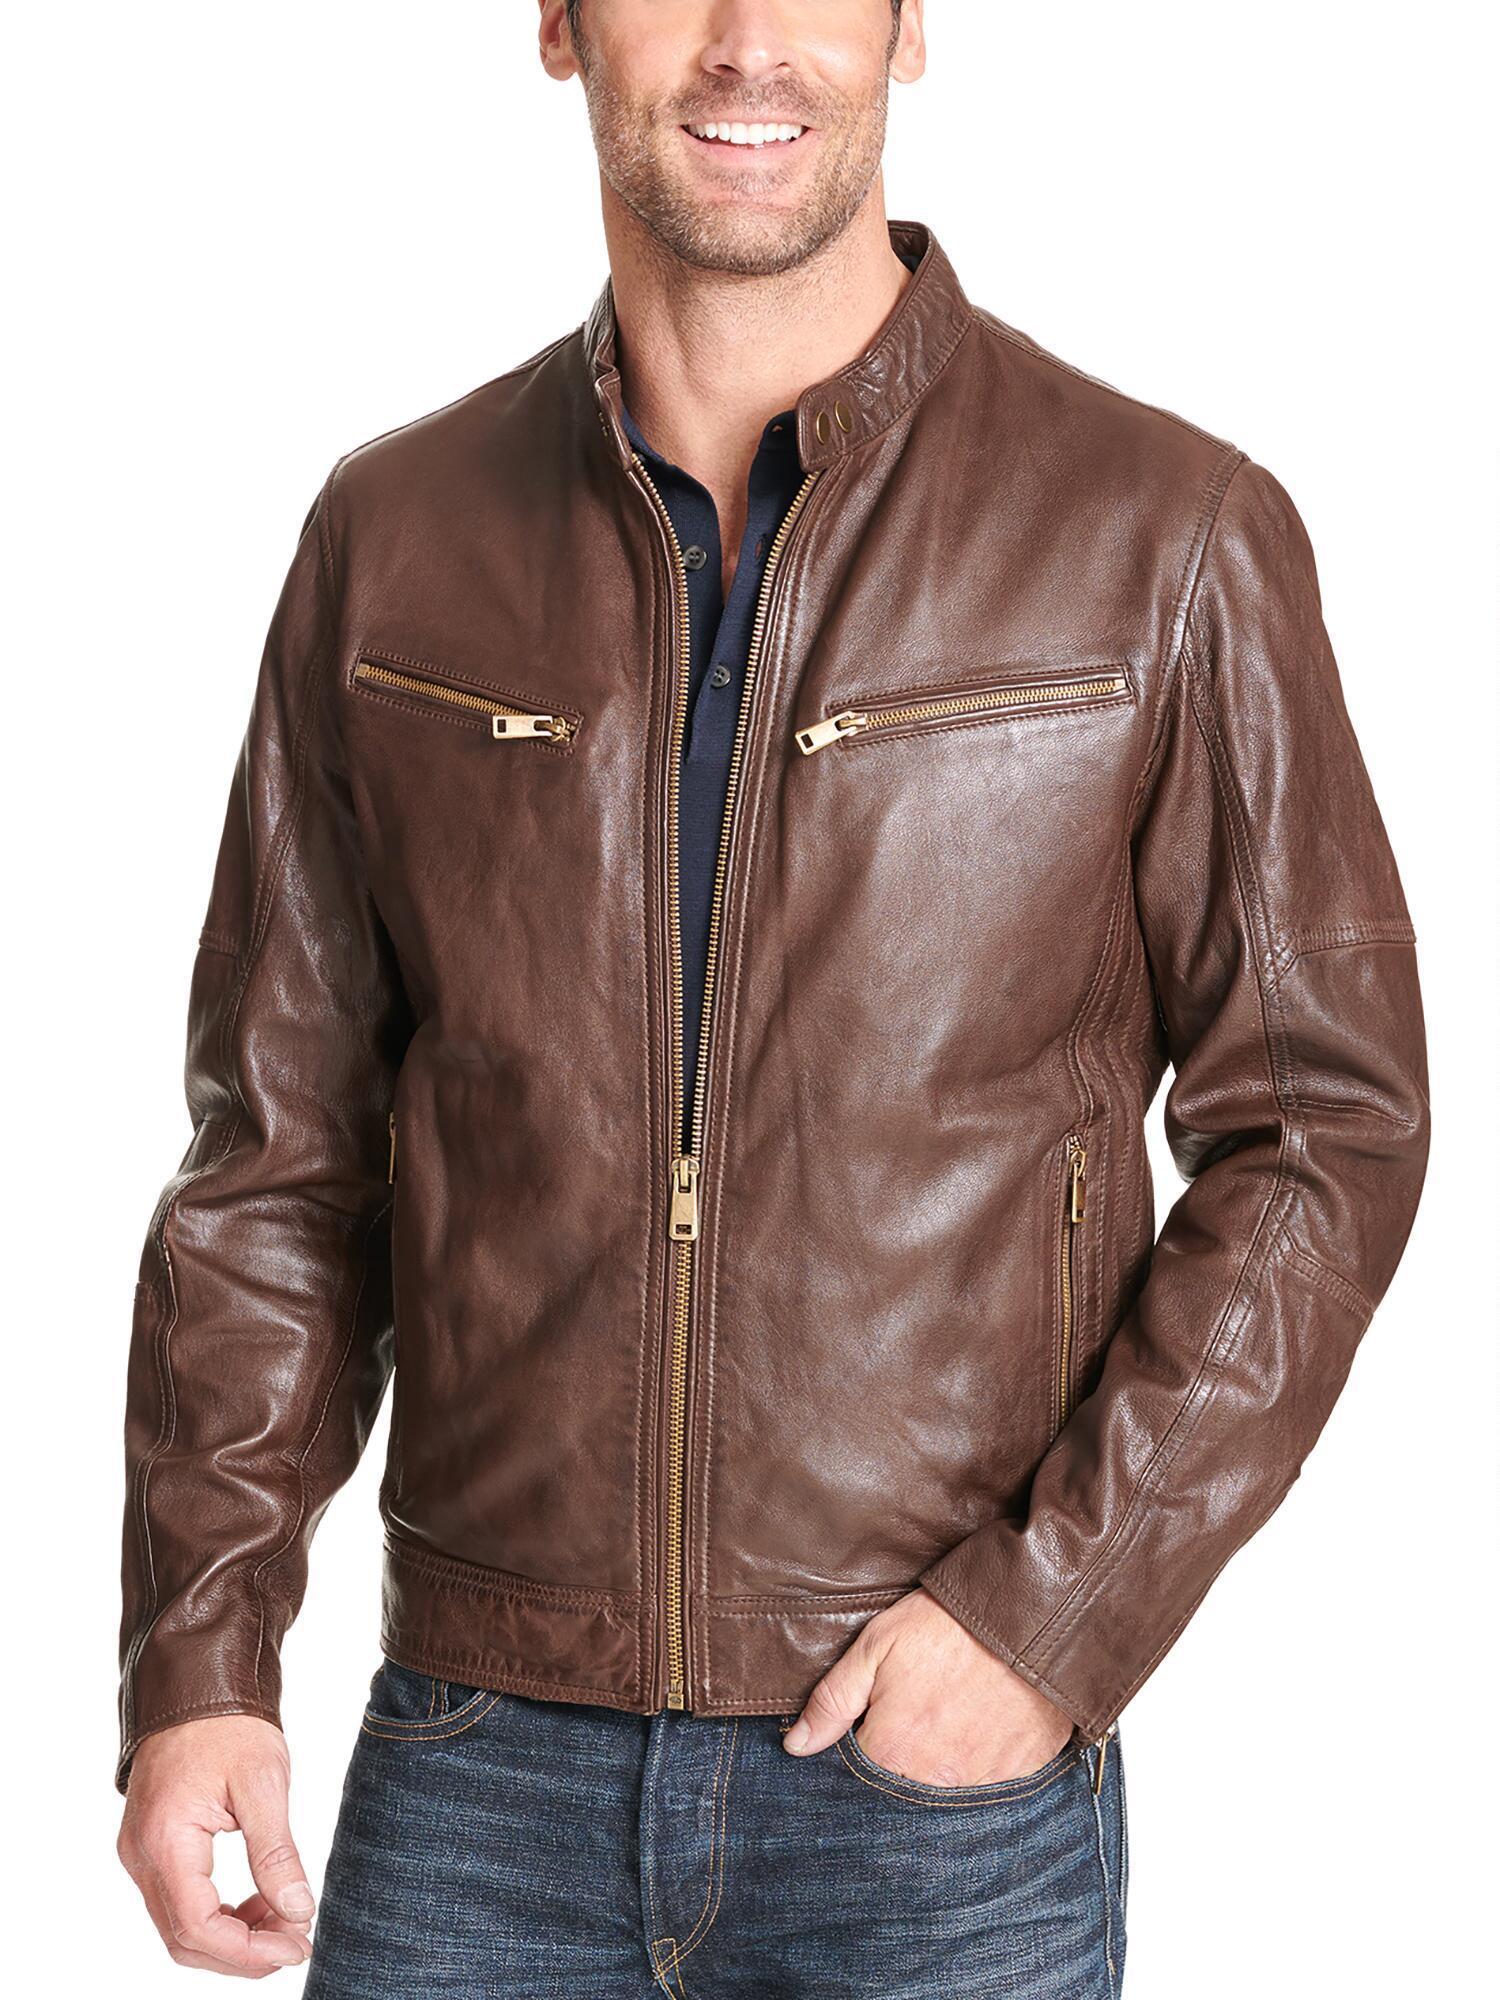 Wilsons Leather Brent Leather Moto Jacket in Brown for Men - Lyst